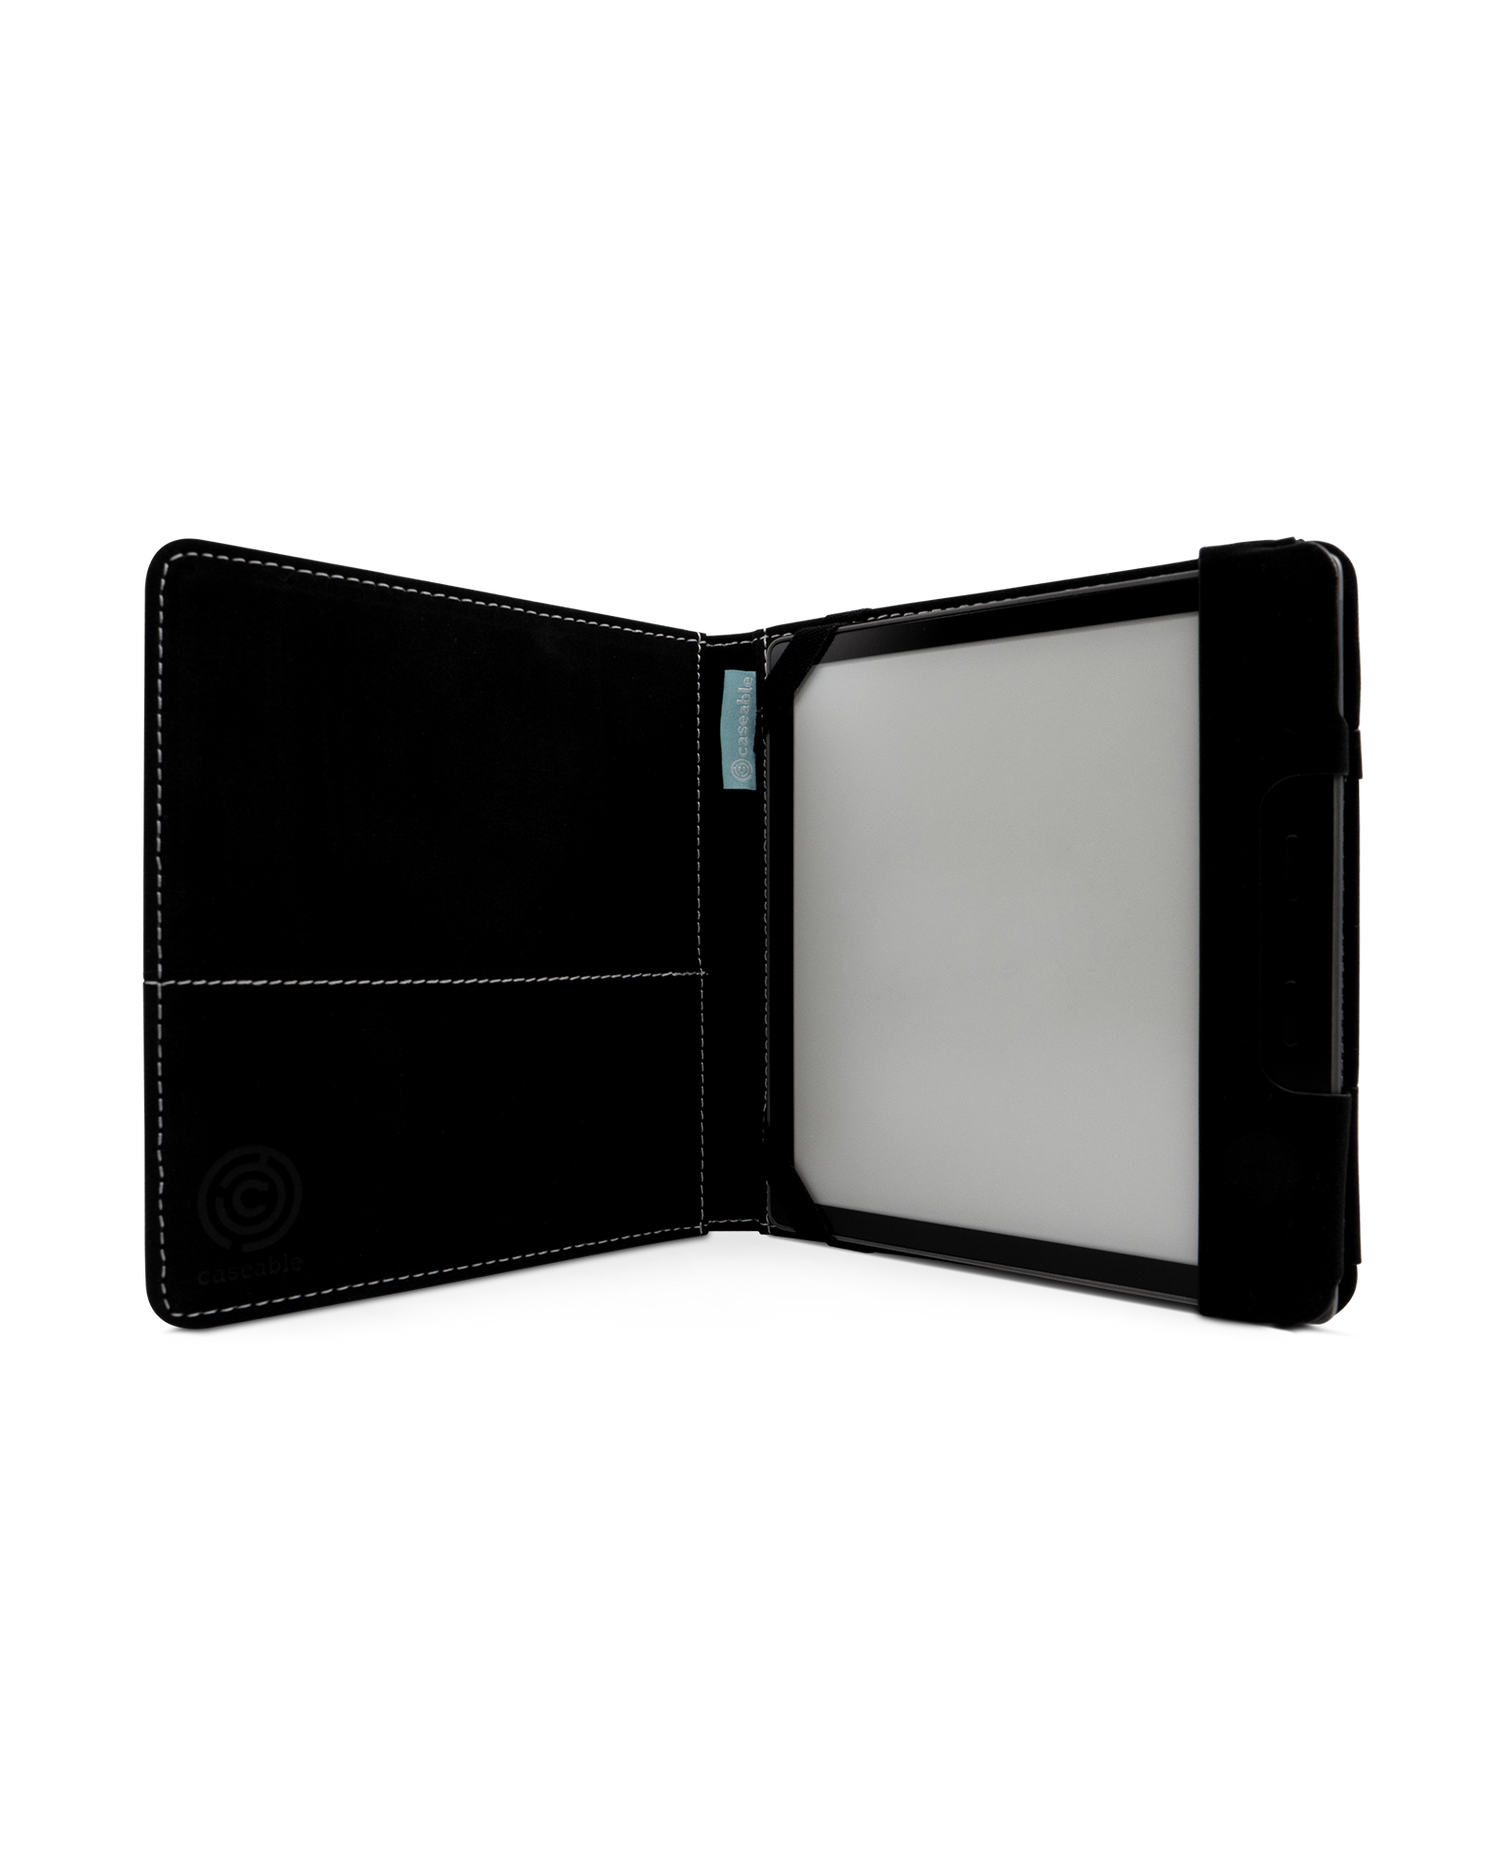 Cool Blues eReader Case for tolino vision 6: Opened interior view